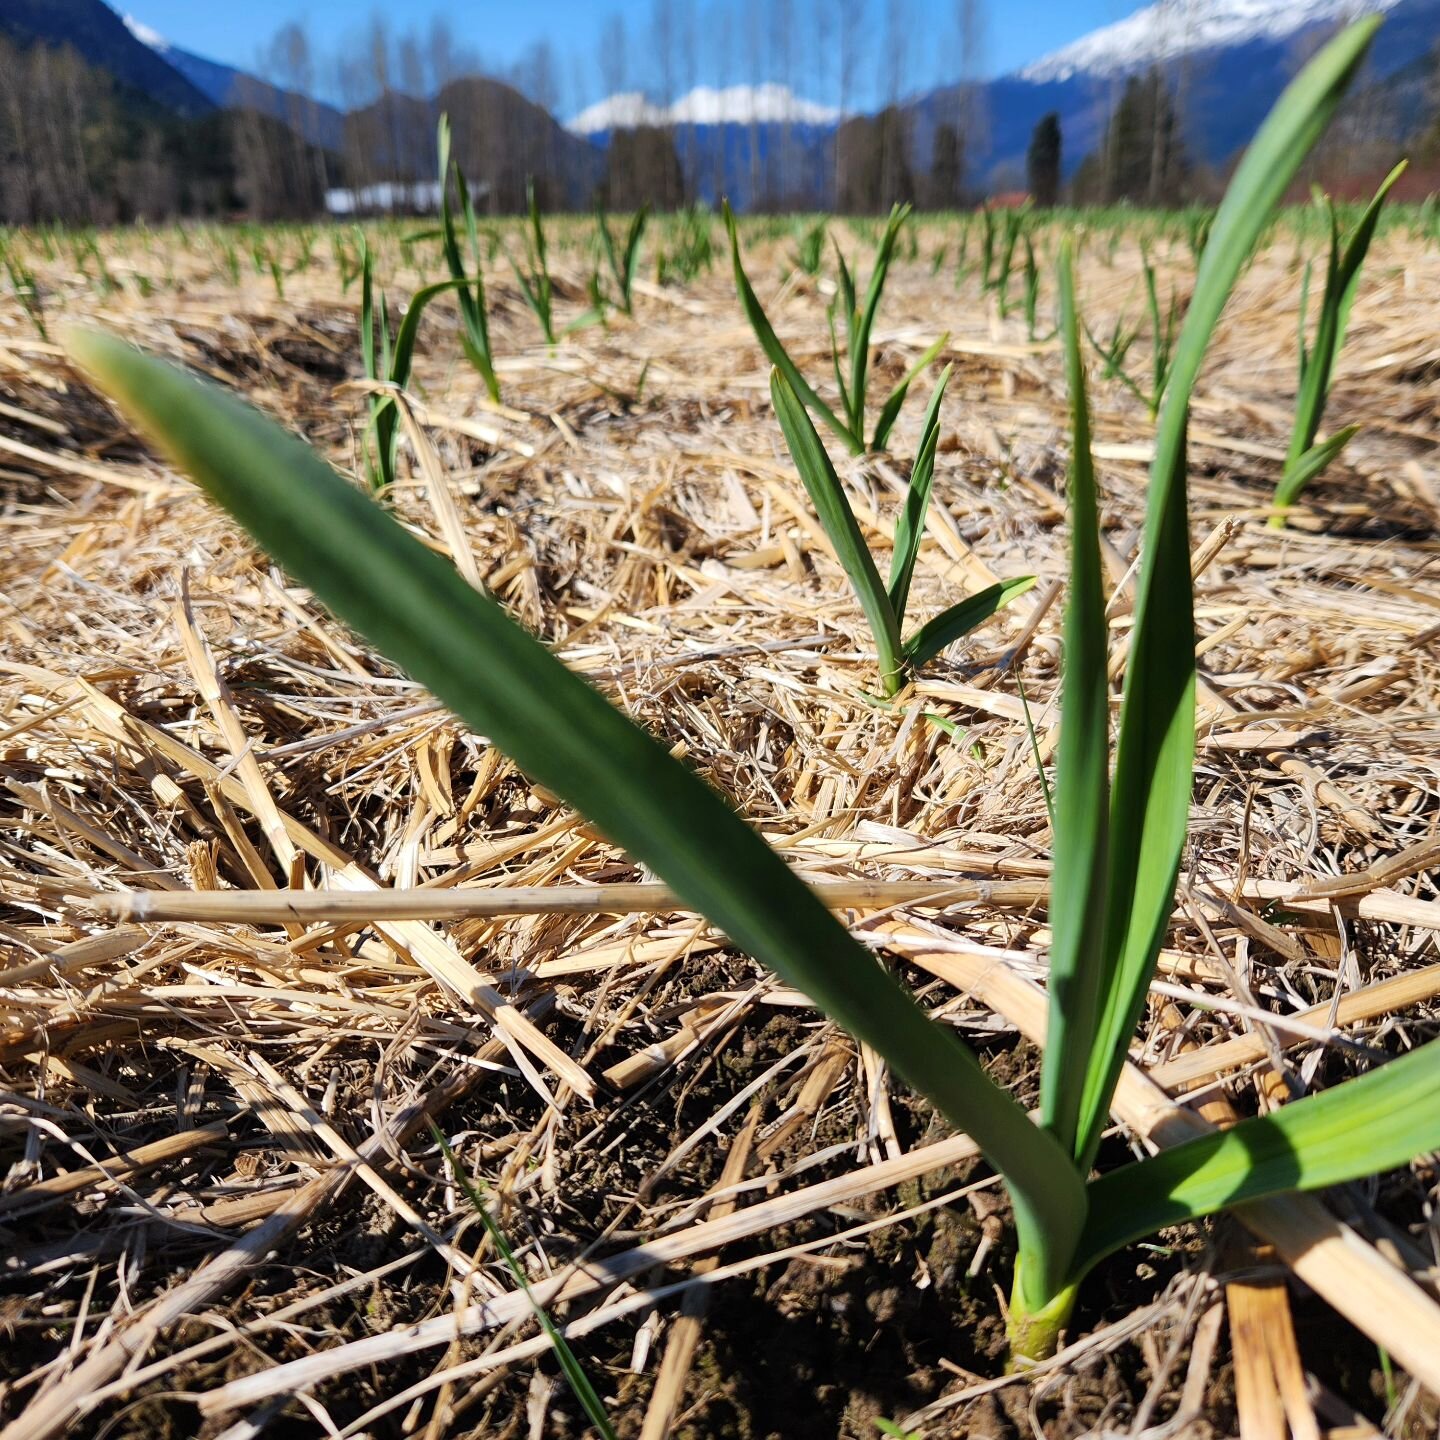 This year's garlic crop is looking fine! It's been loving this spring weather and sunshine and has put on inches of leaf growth in the past couple weeks alone. Go garlic! 💪

Who's excited for a fresh garlic crop this year?! (Of course preceded by th